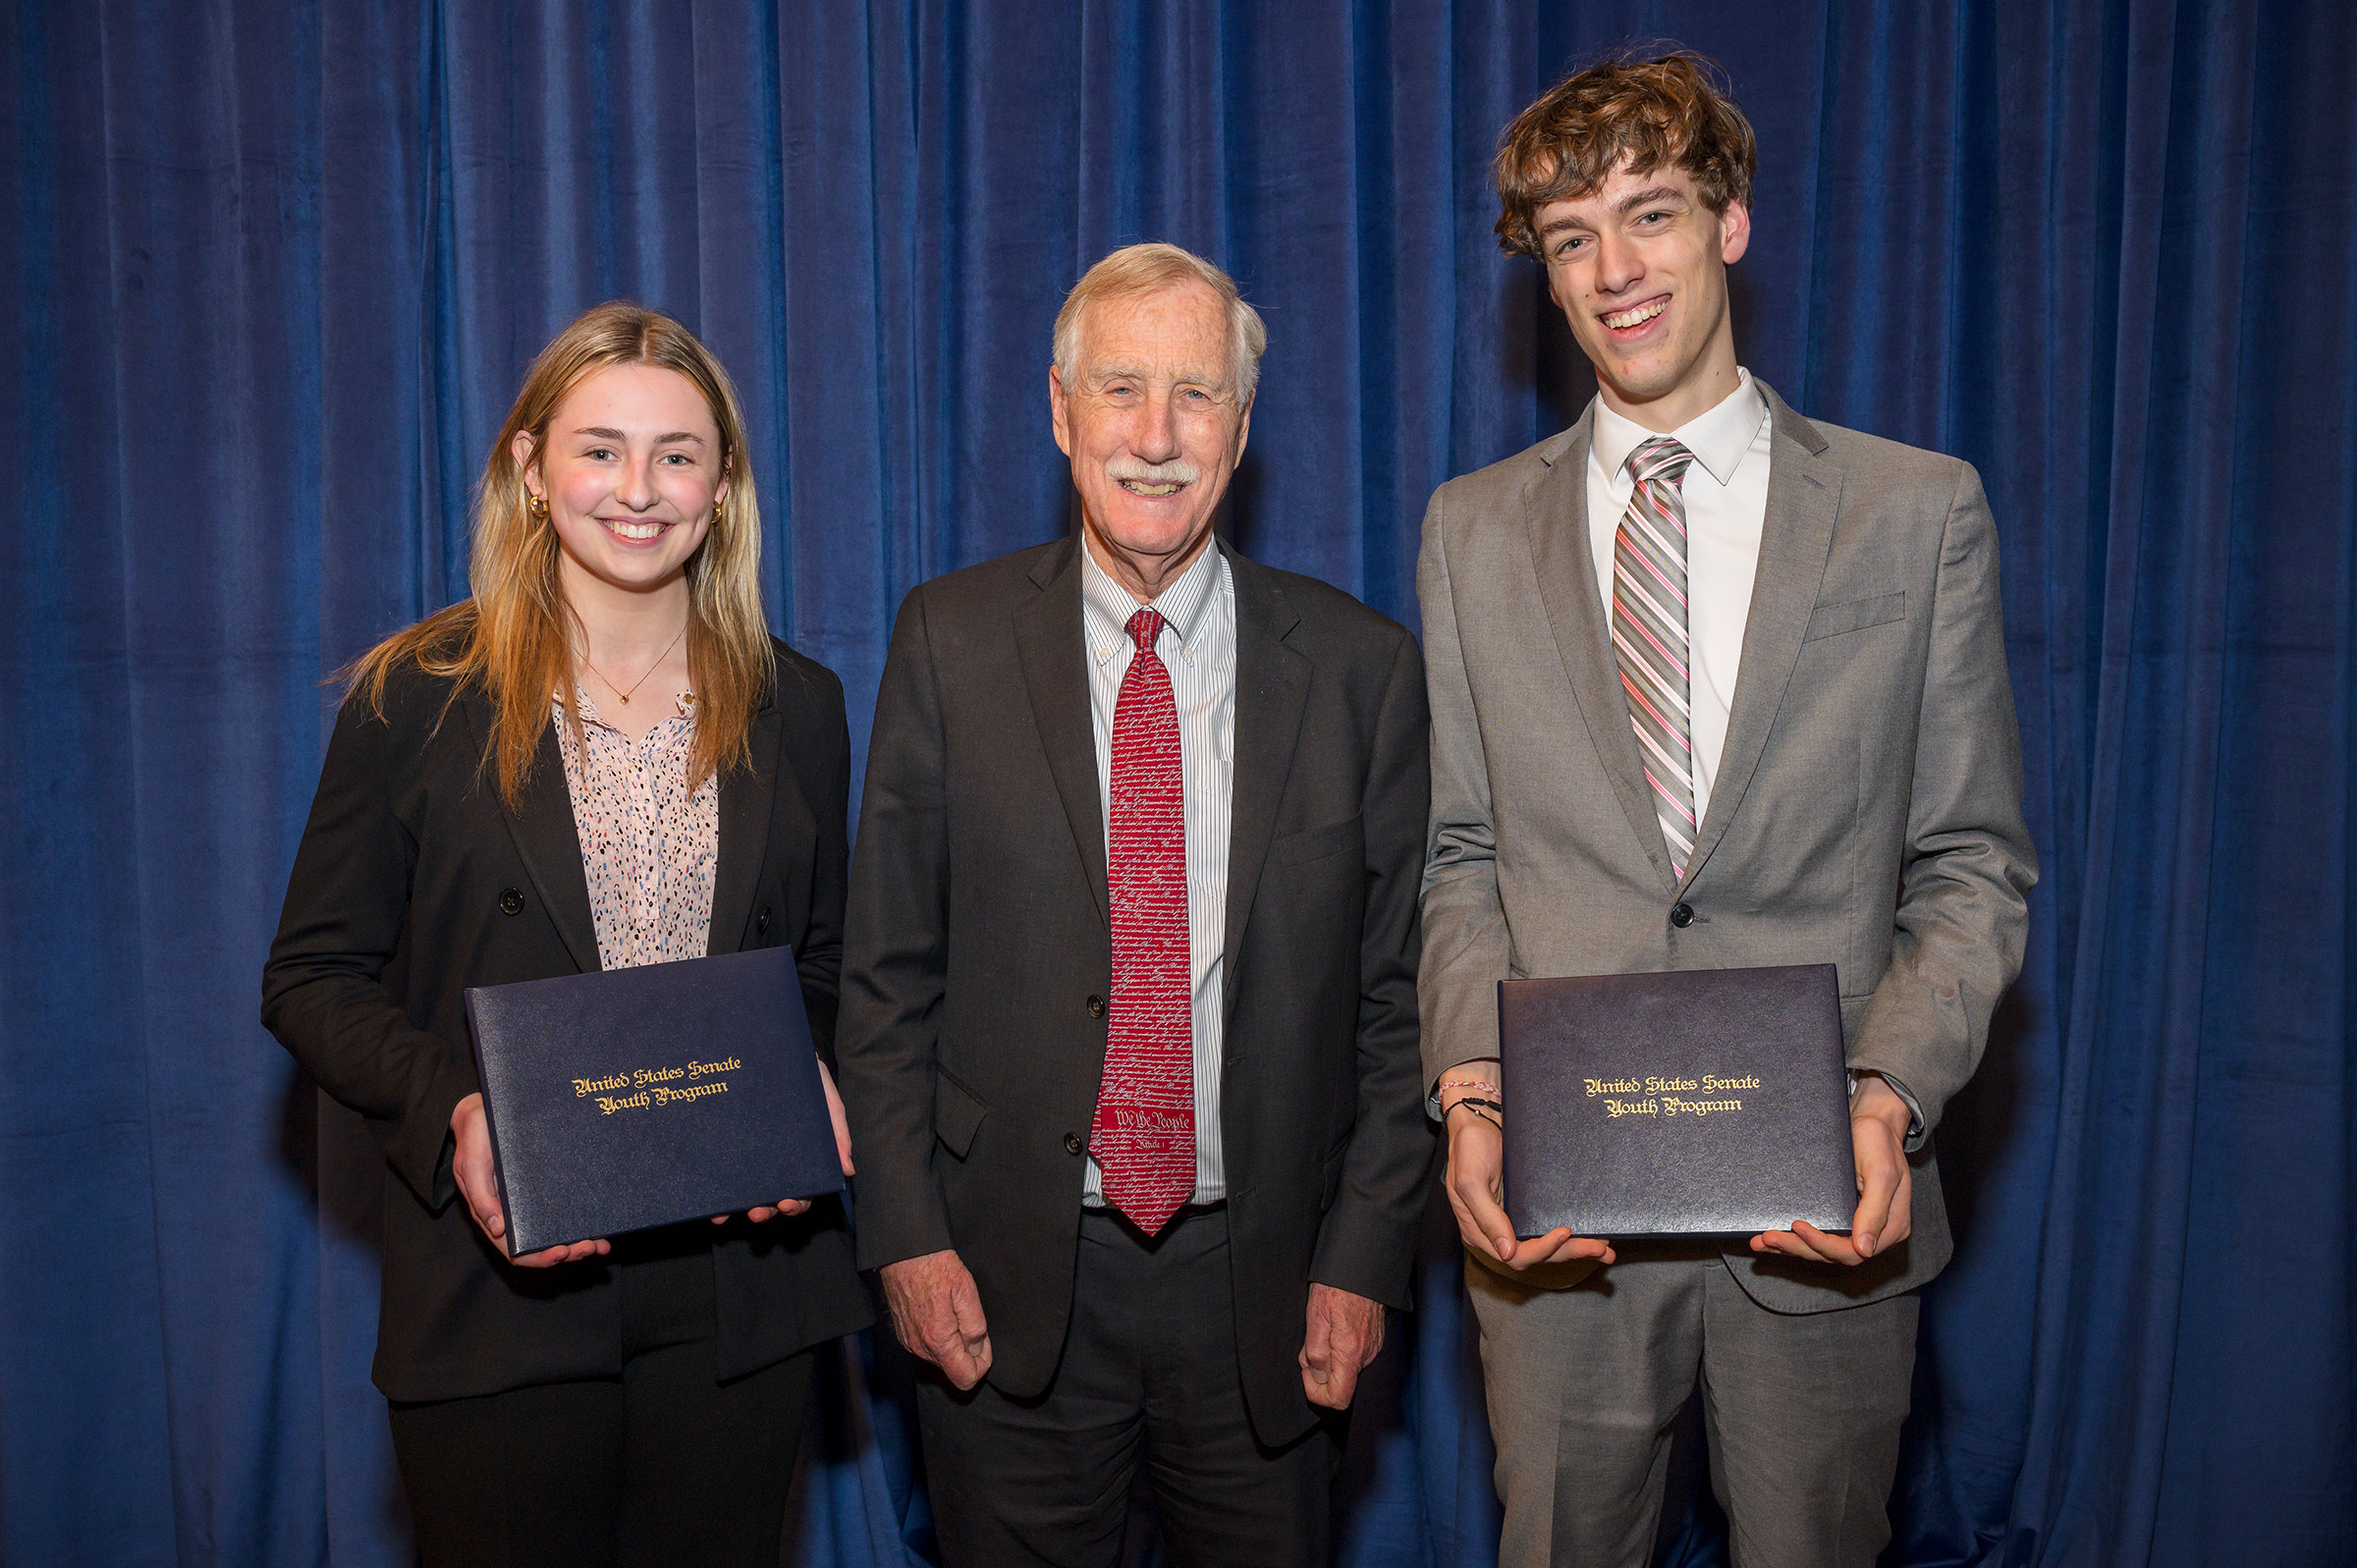 Senator Angus King with delegates Claire Ouellette and Ryan Hafener